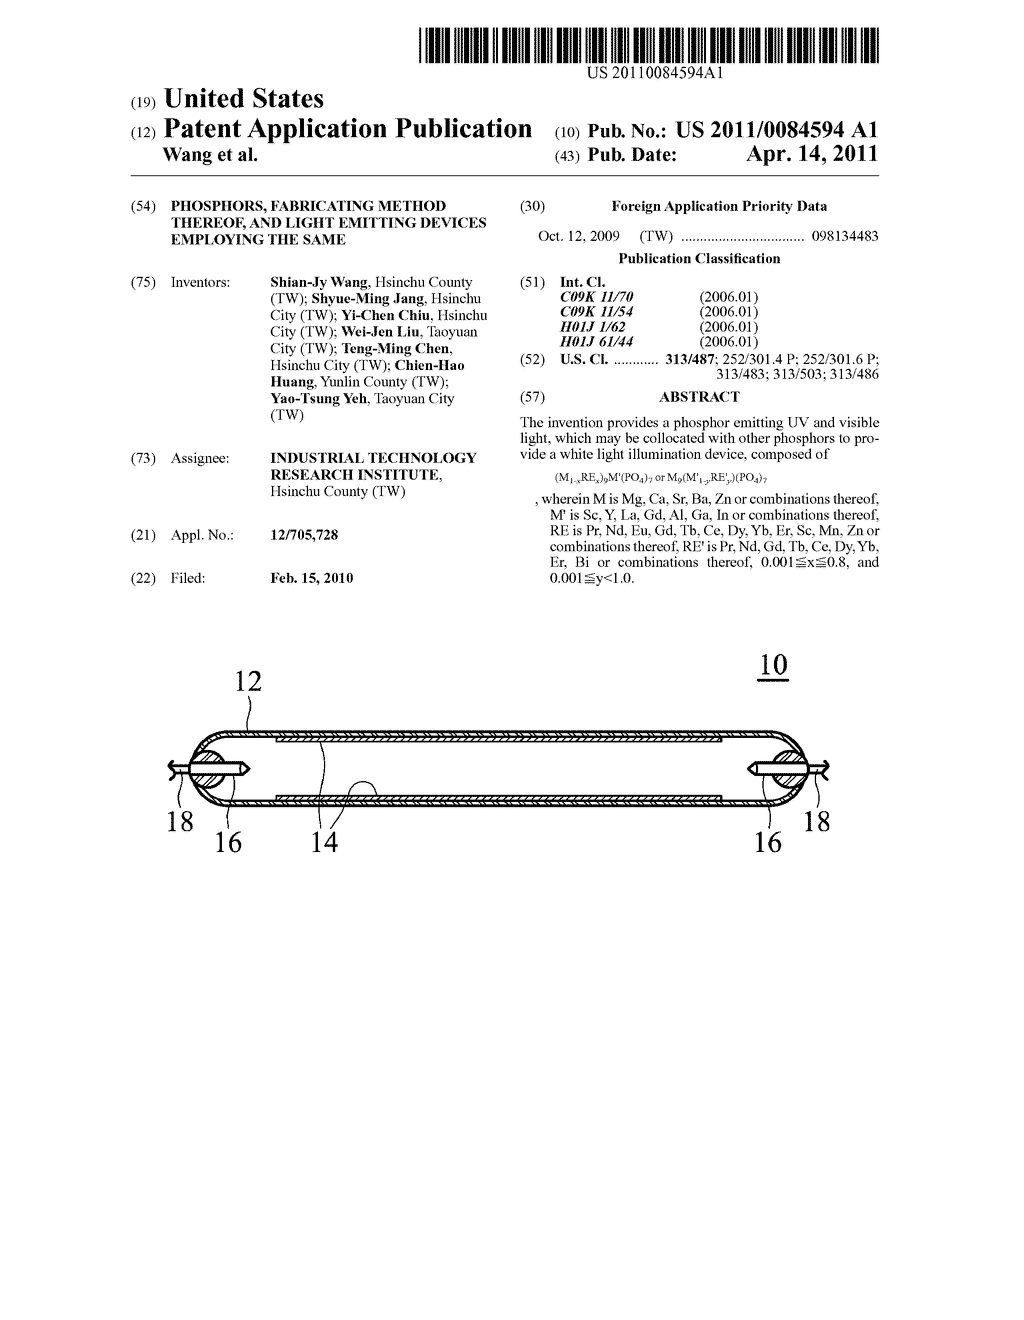 PHOSPHORS, FABRICATING METHOD THEREOF, AND LIGHT EMITTING DEVICES EMPLOYING THE SAME - diagram, schematic, and image 01